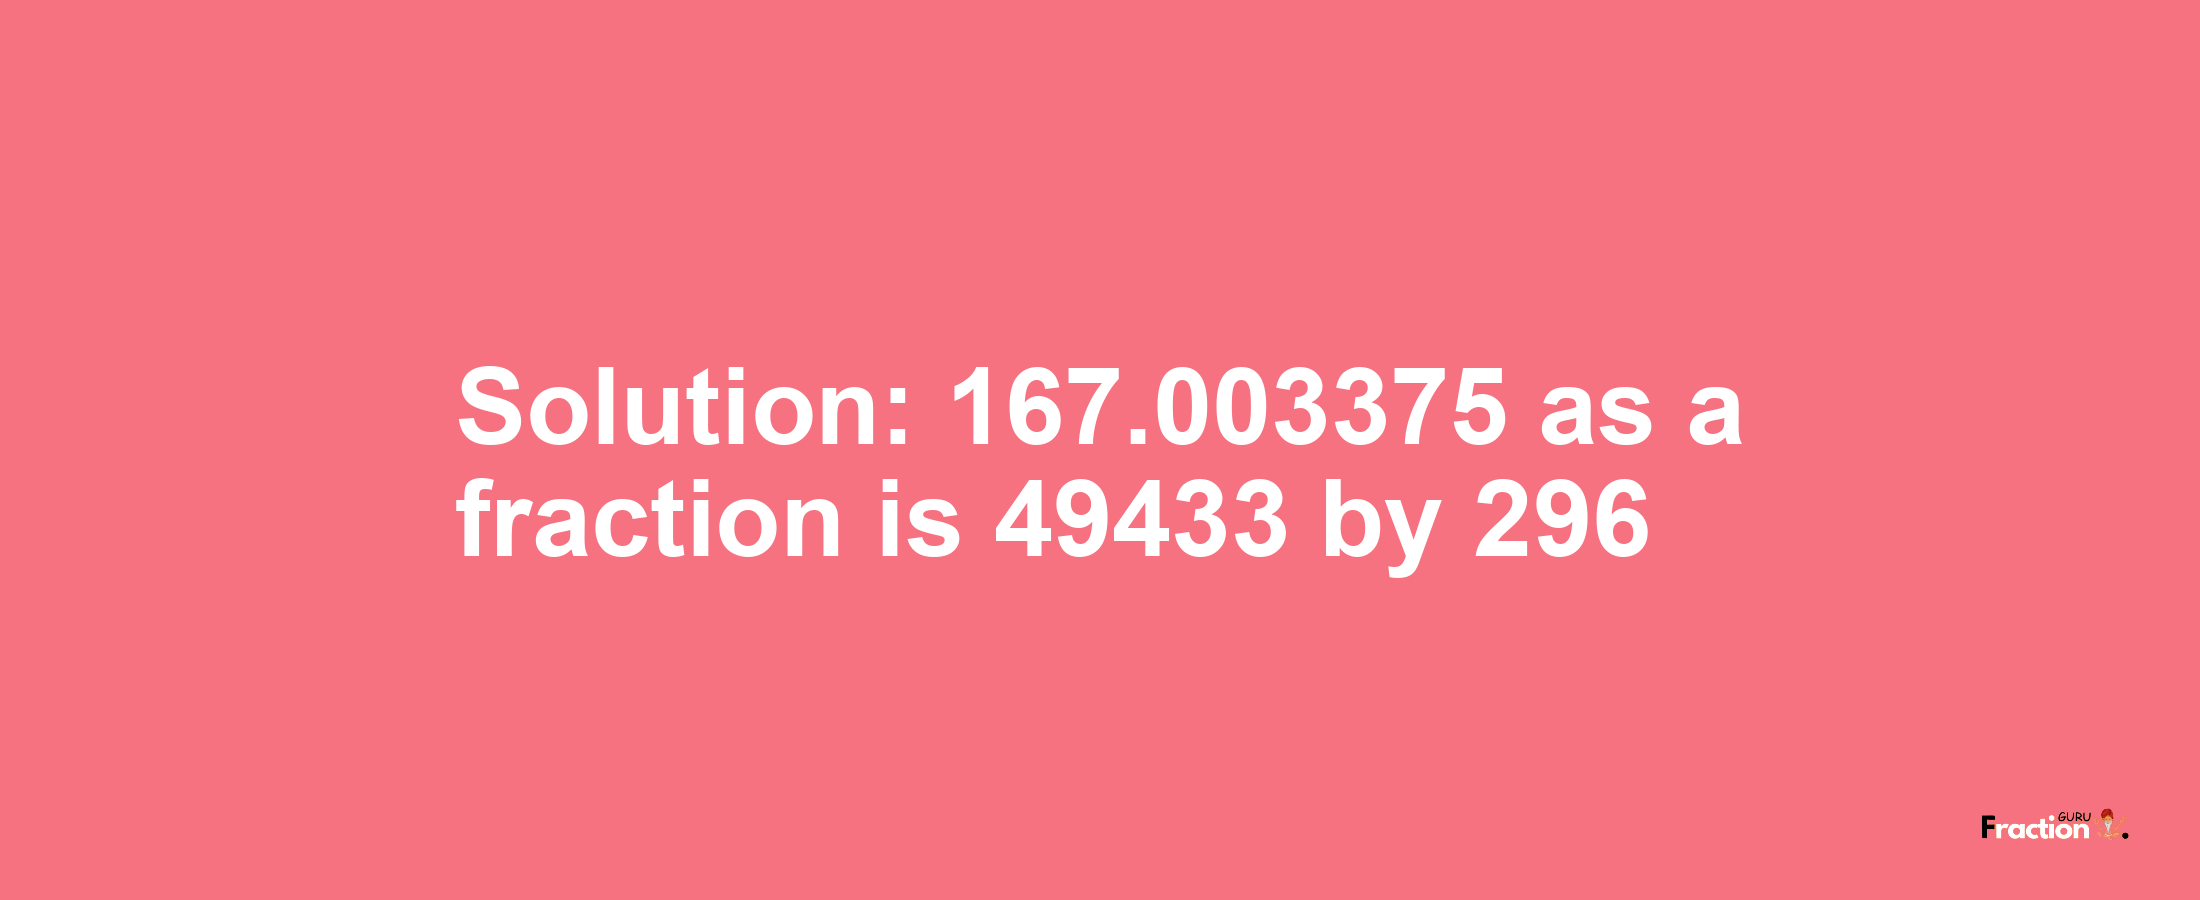 Solution:167.003375 as a fraction is 49433/296